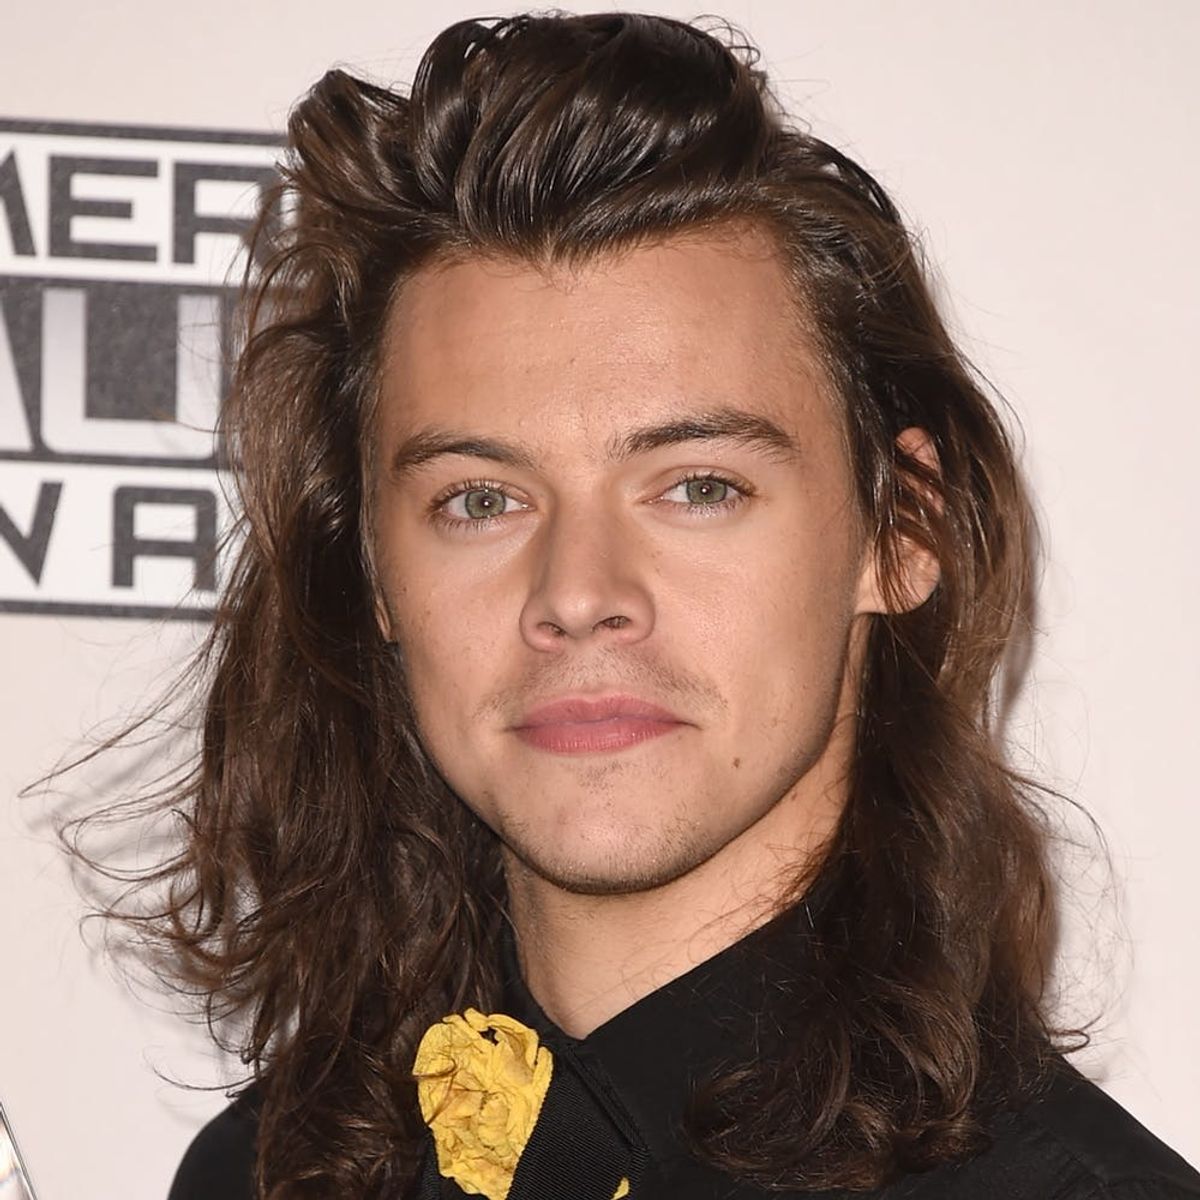 Harry Styles May Have Just Leaked His Solo Release Date and Twitter Is Losing Its Mind